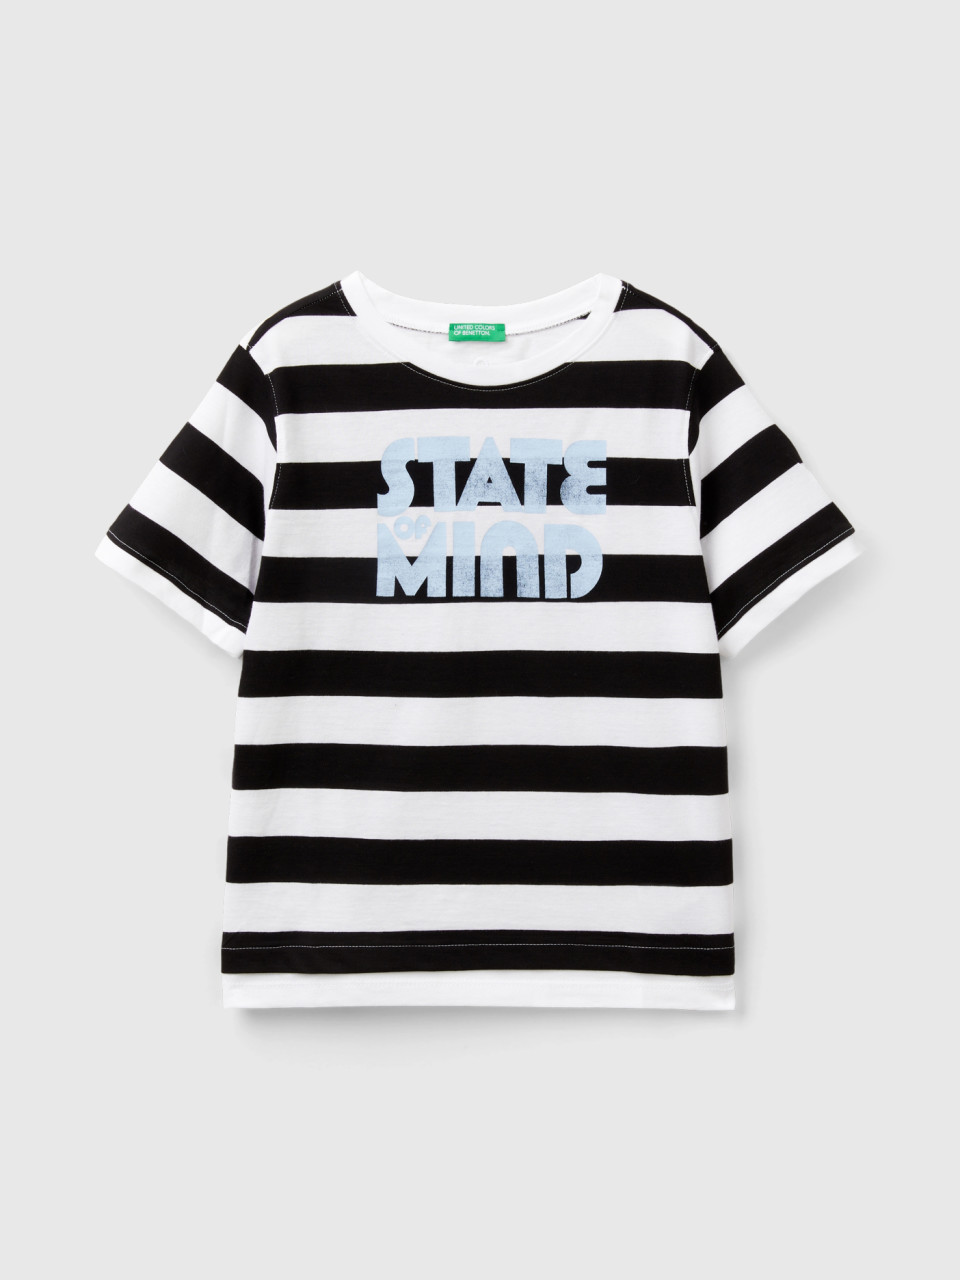 Benetton, Striped T-shirt With Slogan, Multi-color, Kids